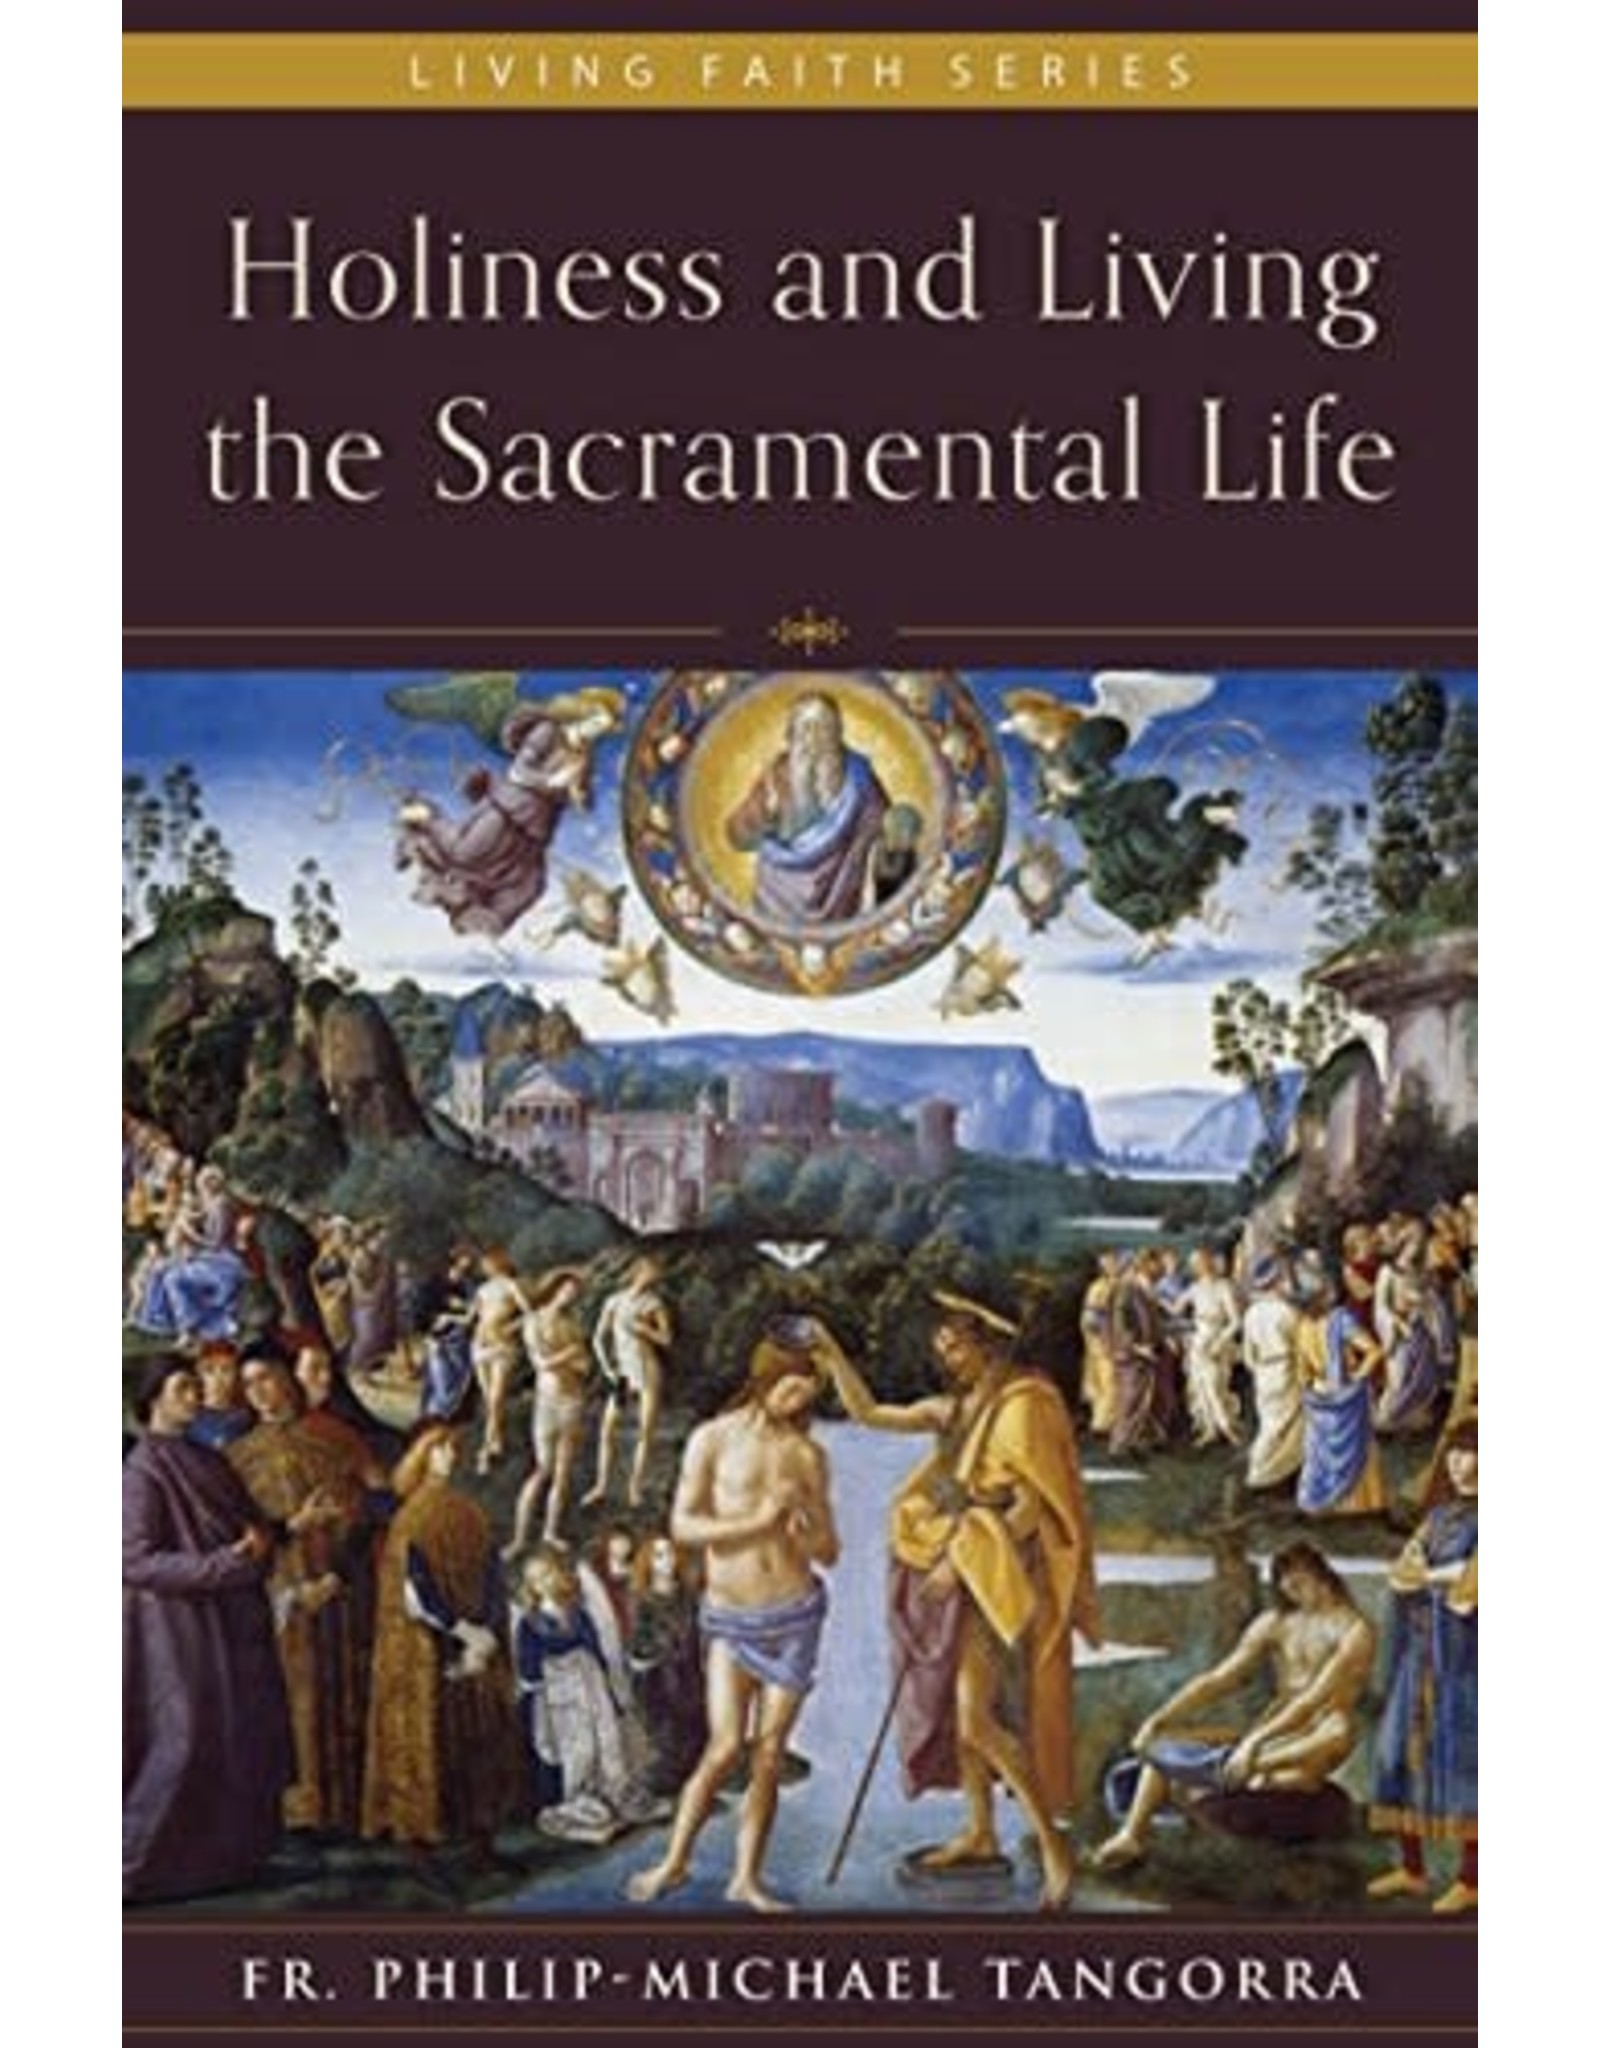 Holiness and Living the Sacramental Life (Living Faith) by Fr. Philip-Michael Tangorra (Hardcover)